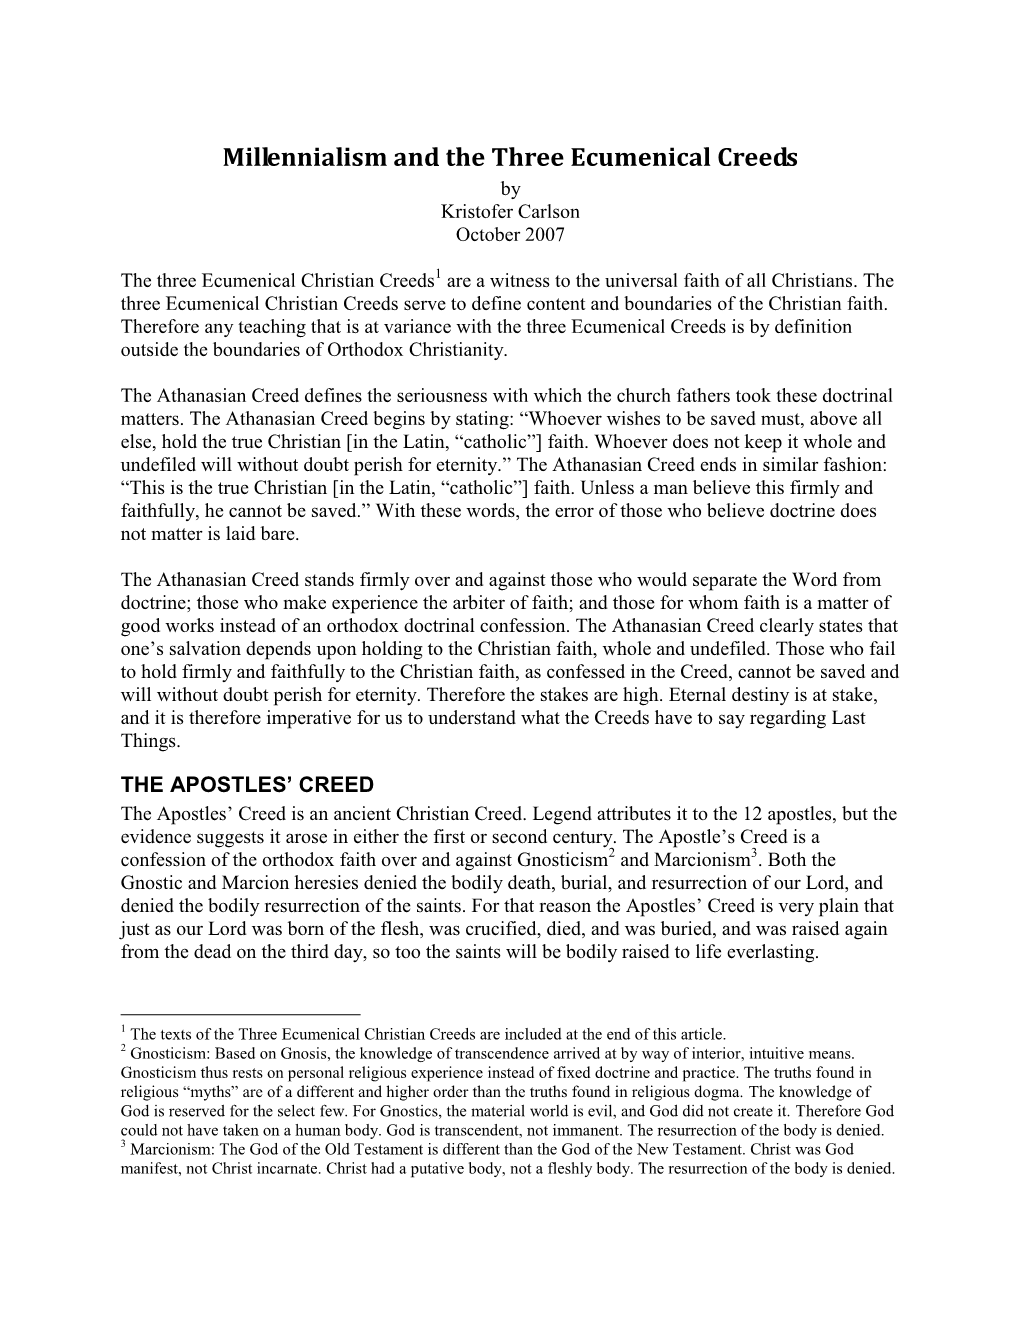 Millennialism and the Three Ecumenical Creeds by Kristofer Carlson October 2007